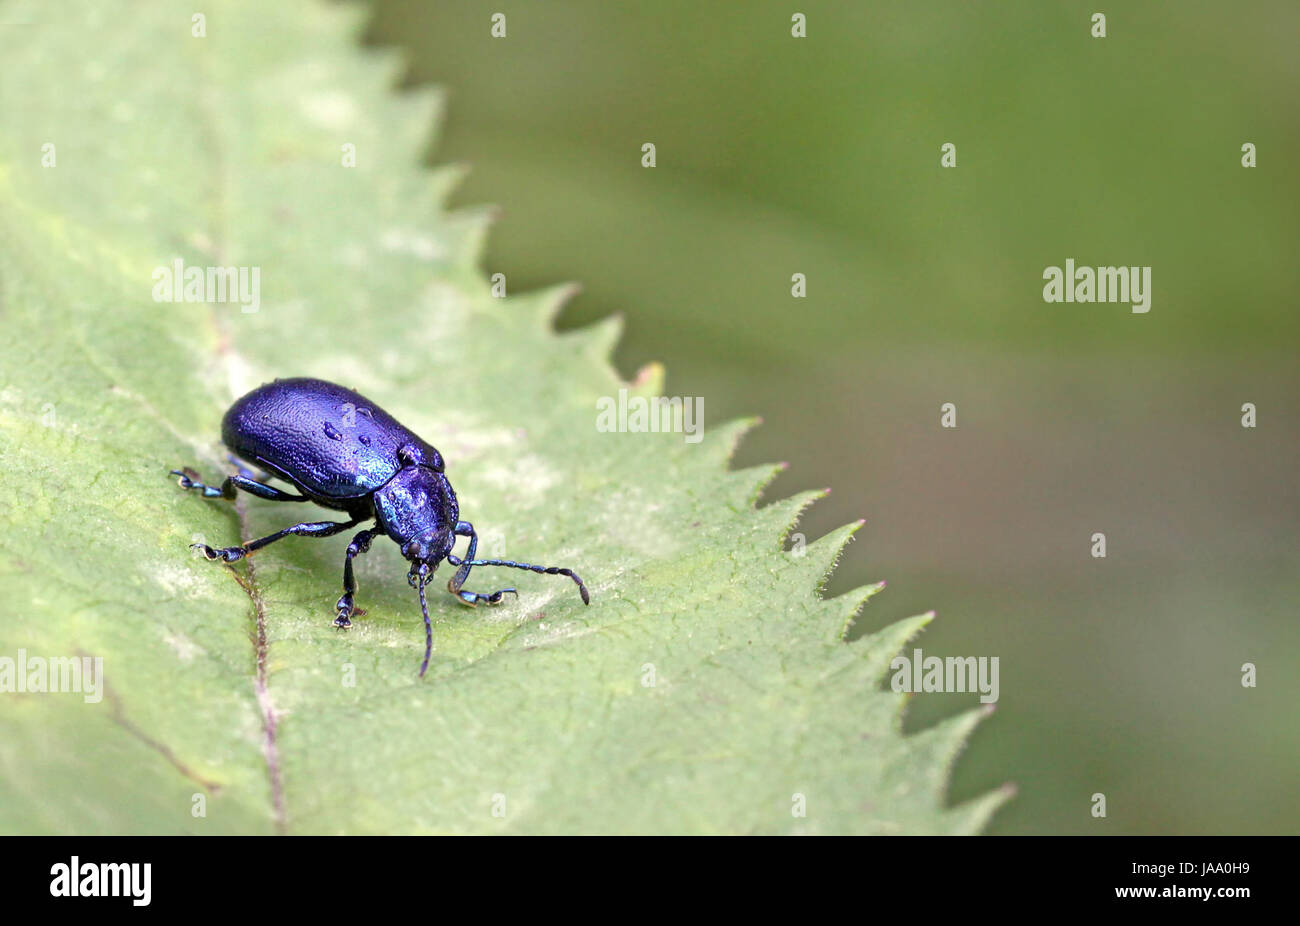 blue, south tyrol, beetle, azure, area of freedom, page, sheet, blue, insect, Stock Photo